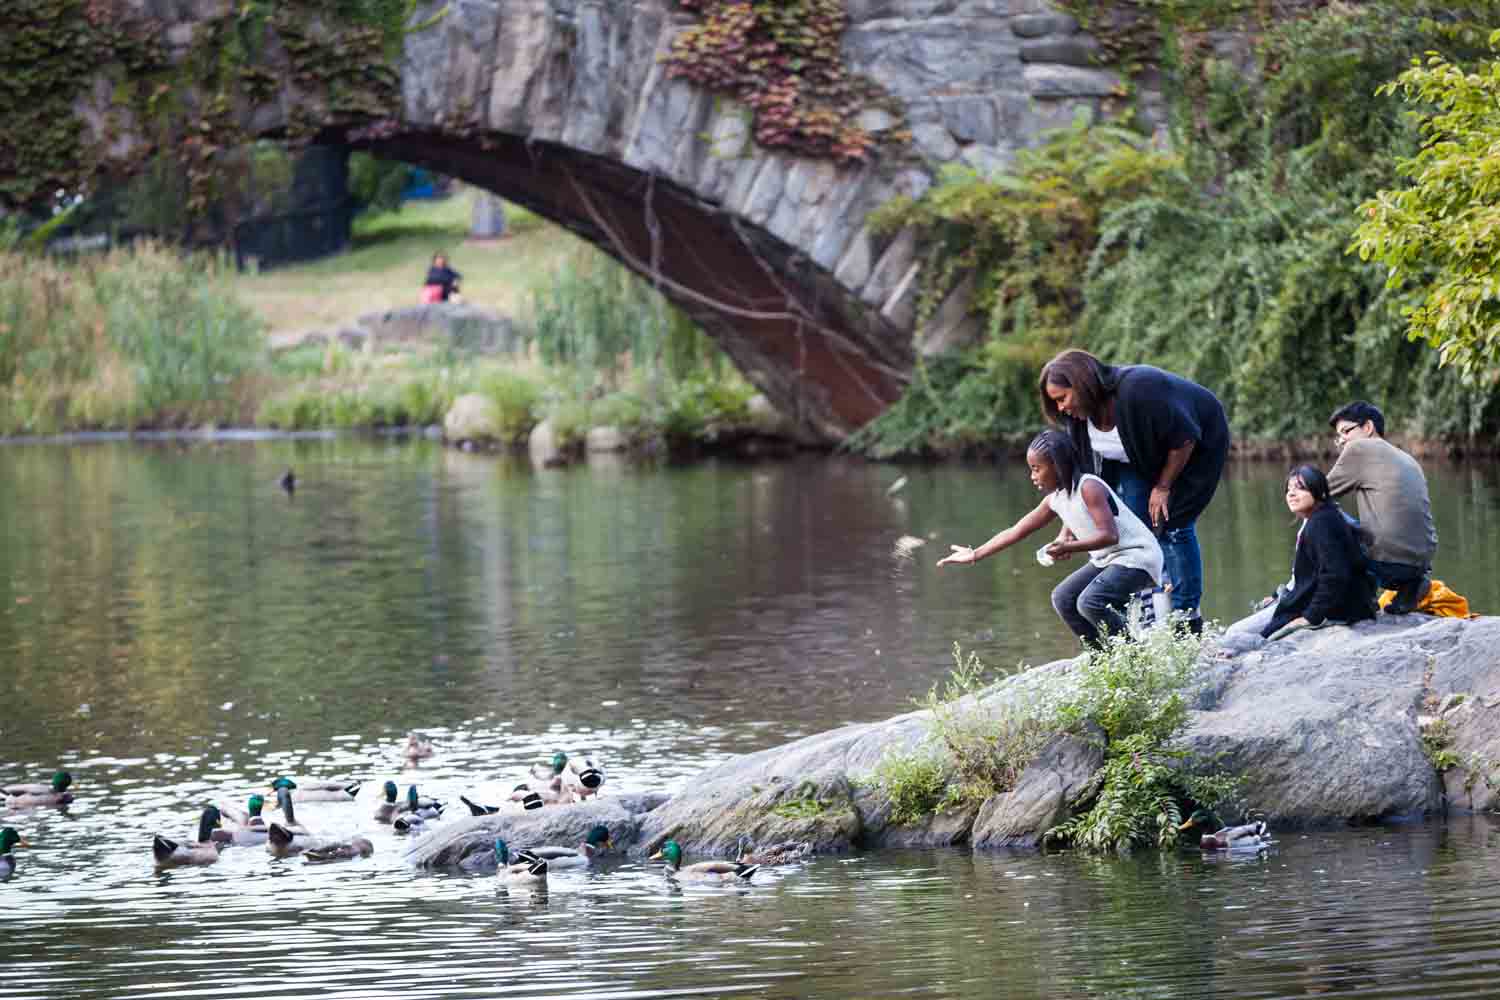 Mother and daughter feeding ducks in front of Gapstow Bridge